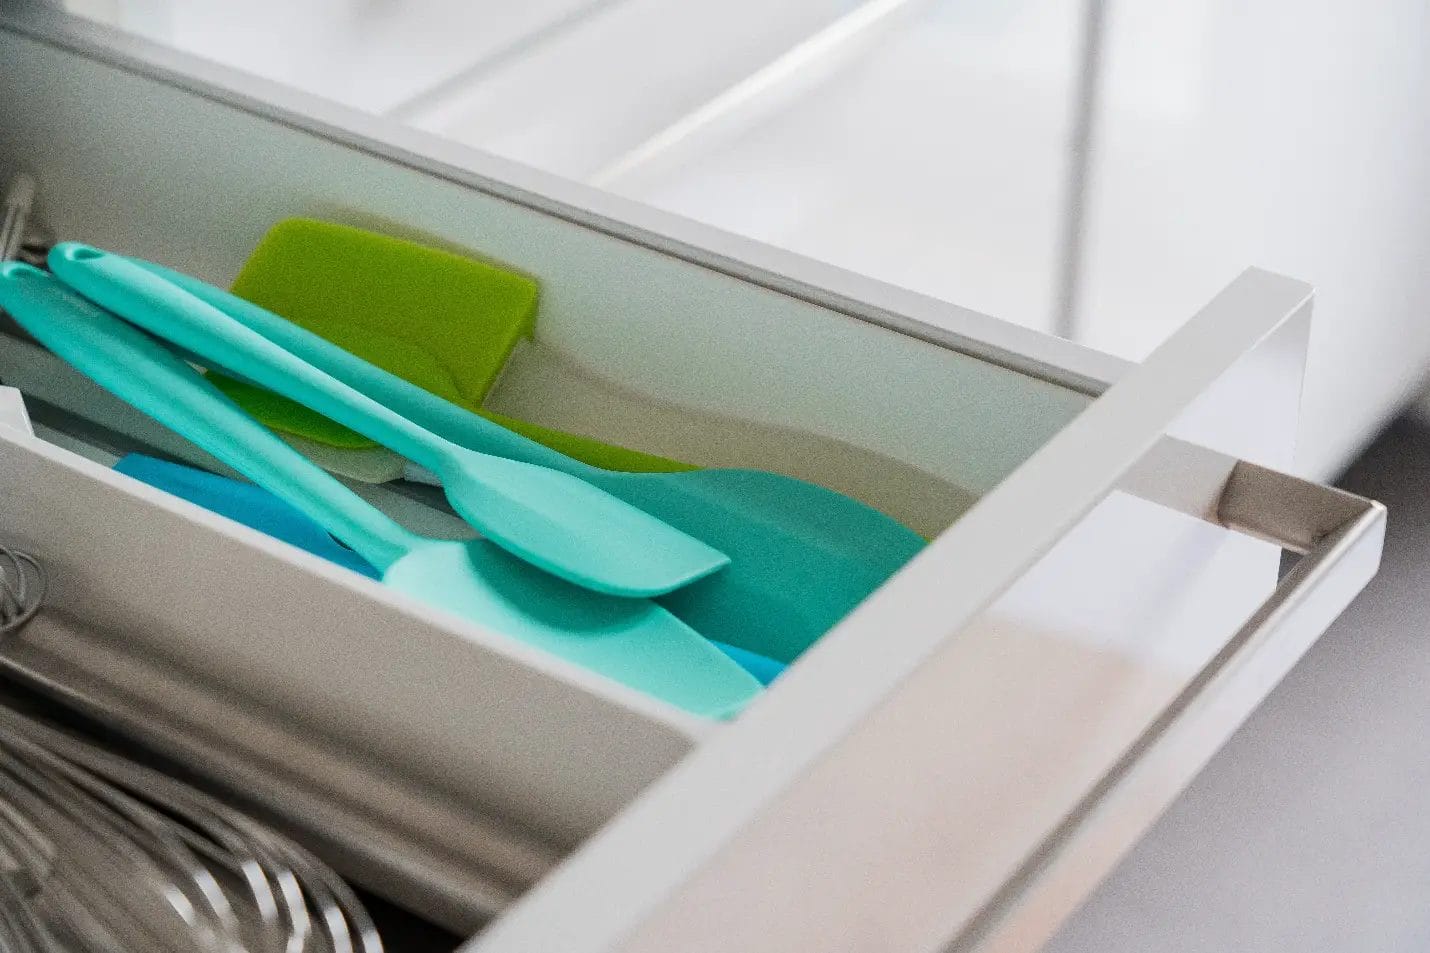 Are Silicone Cooking Utensils Better?